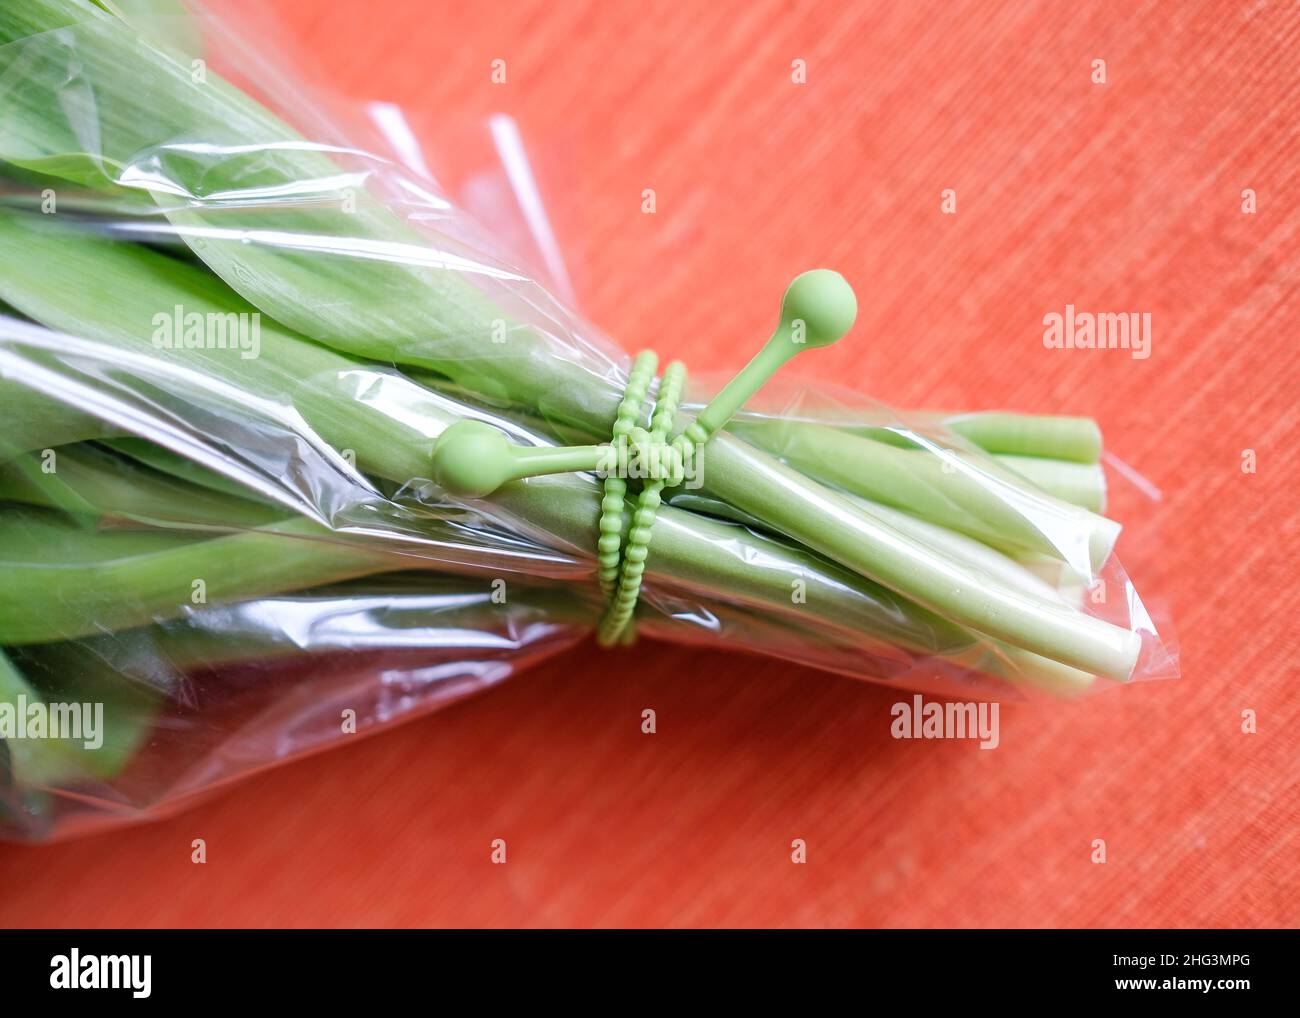 A bouquet of tulips is tightened in a silicone tourniquet. Stock Photo